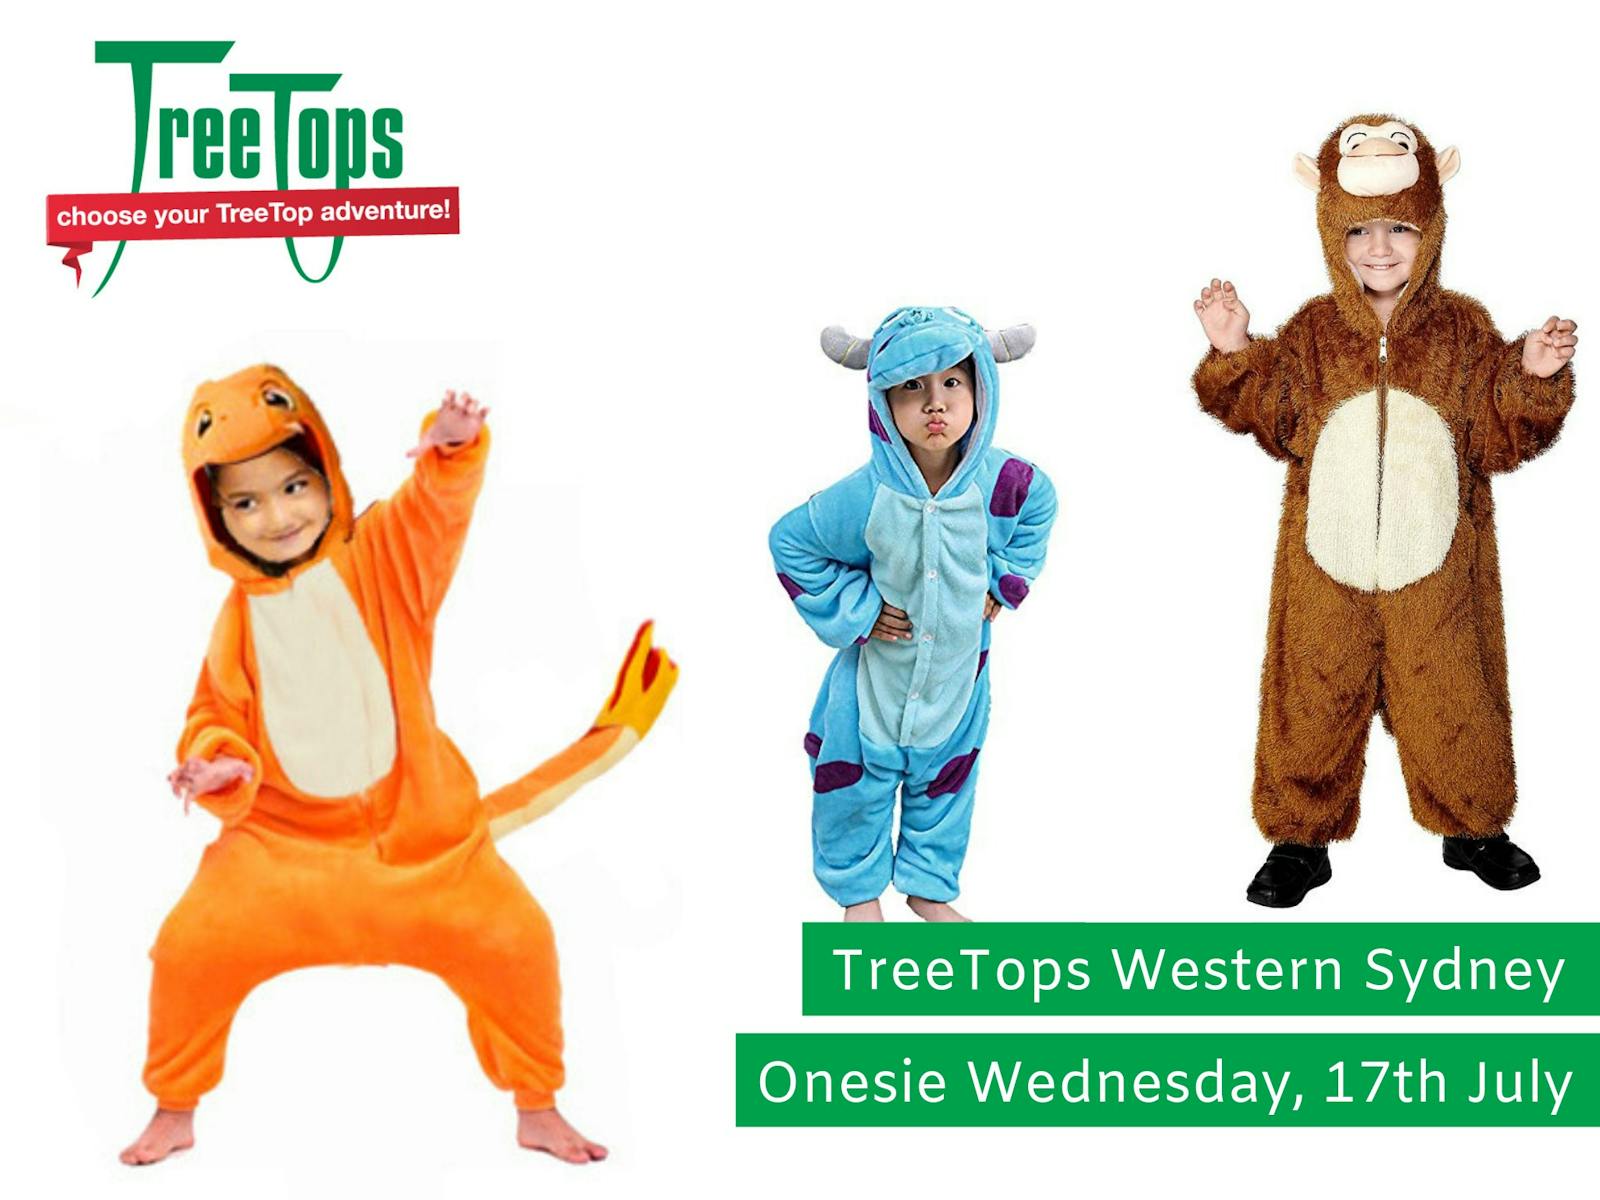 Image for Onesie Wednesday at TreeTops Western Sydney